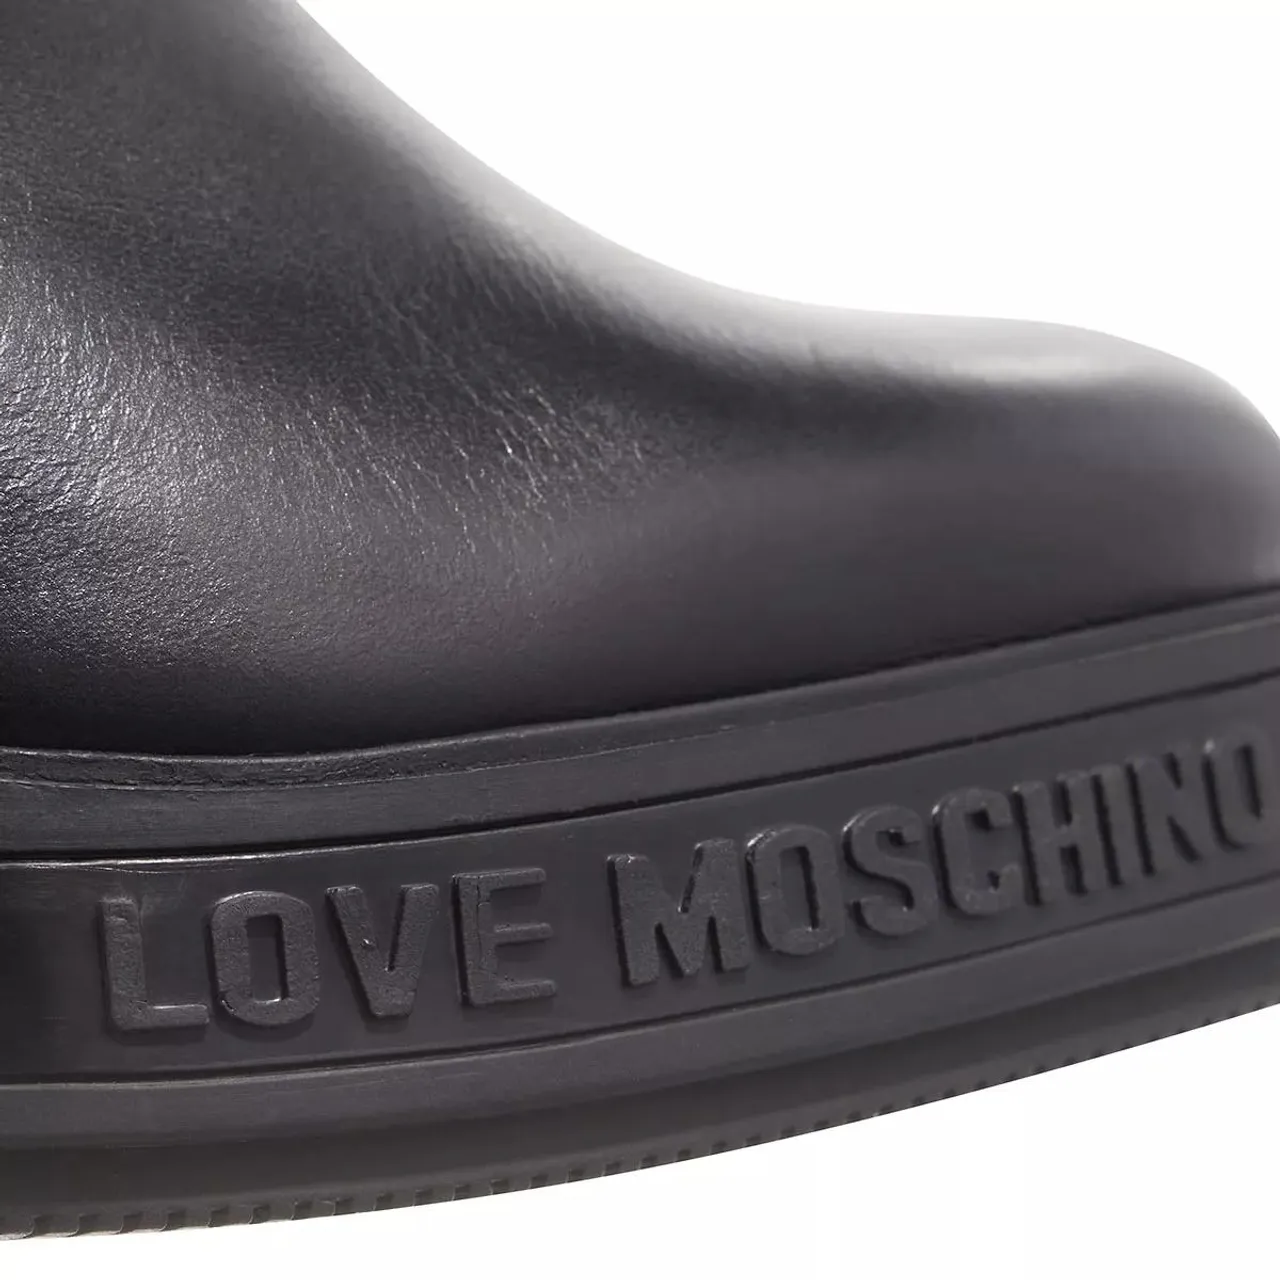 Love Moschino Boots & Ankle Boots - Stivaled.Carro100 Vit+Stretchpu - black - Boots & Ankle Boots for ladies